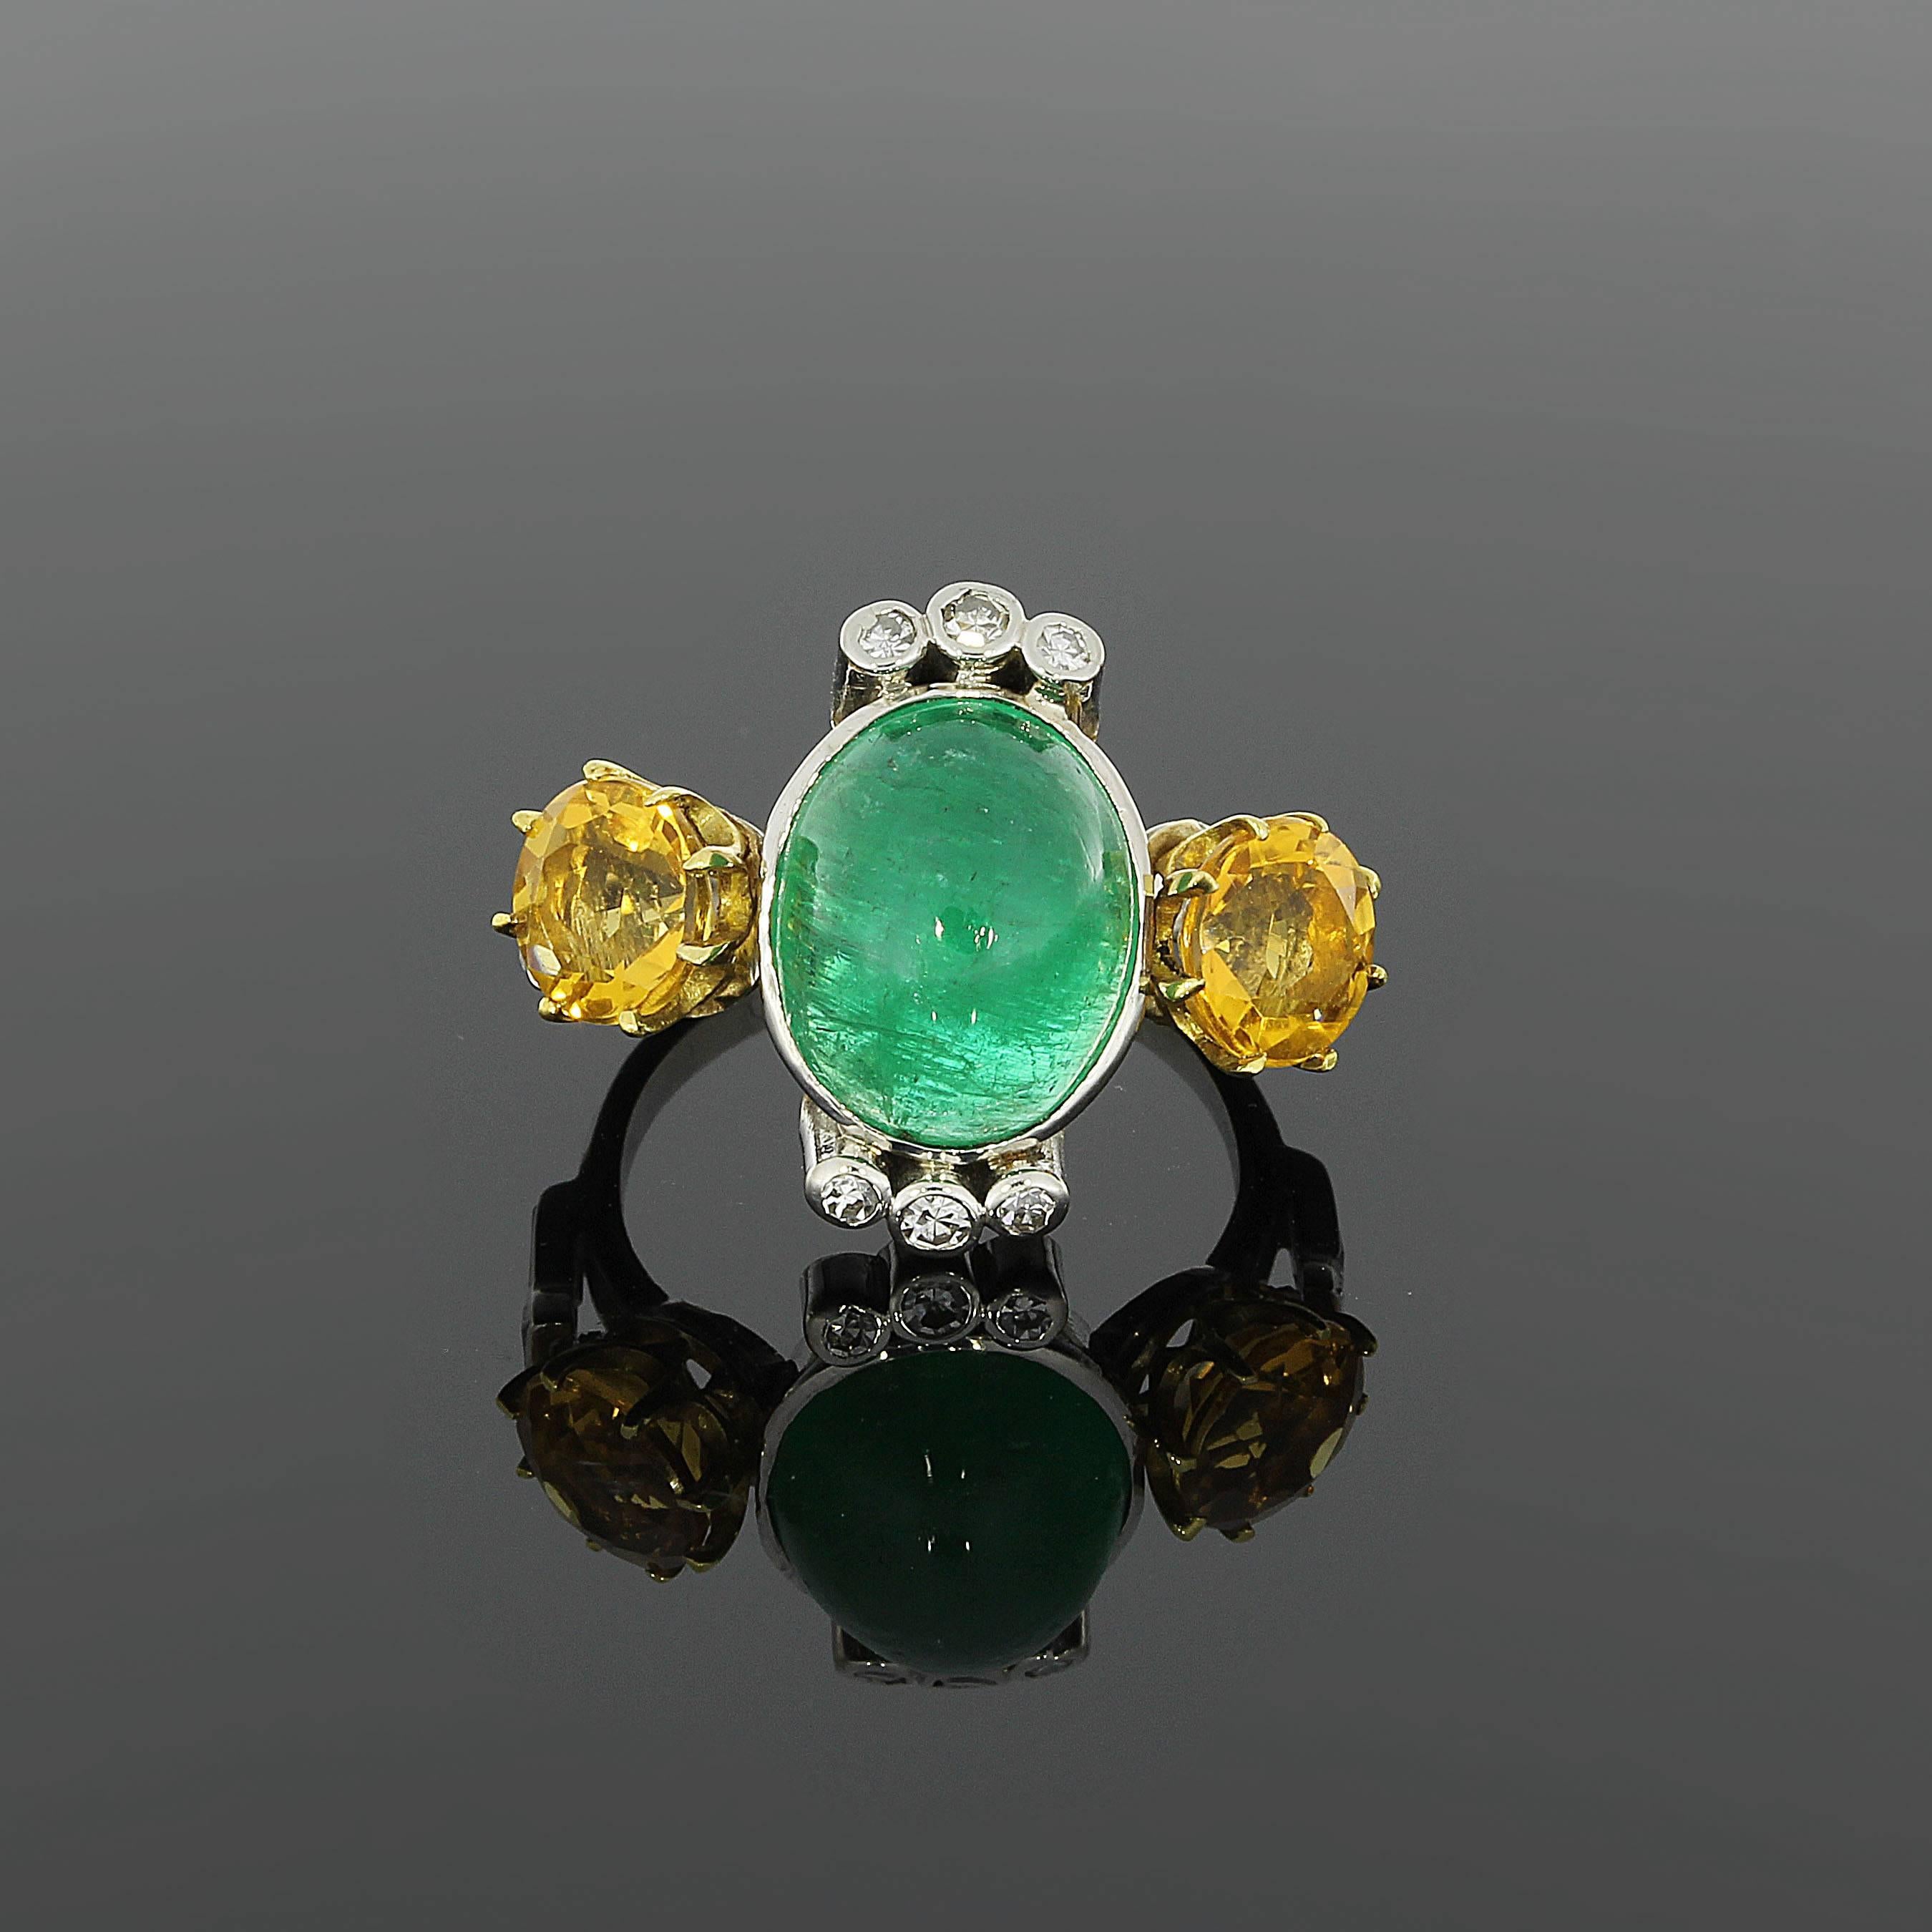 Set with oval shape columbian emerald cabochon. The center stone is flanked by 2 citrines and decorated by 6 brilliant-cut diamonds. Enhanced by 2 baguette-cut diamonds and 2 trapezoid shape diamonds. Totally circa 0,50 ct. Weight: 5,58 g.